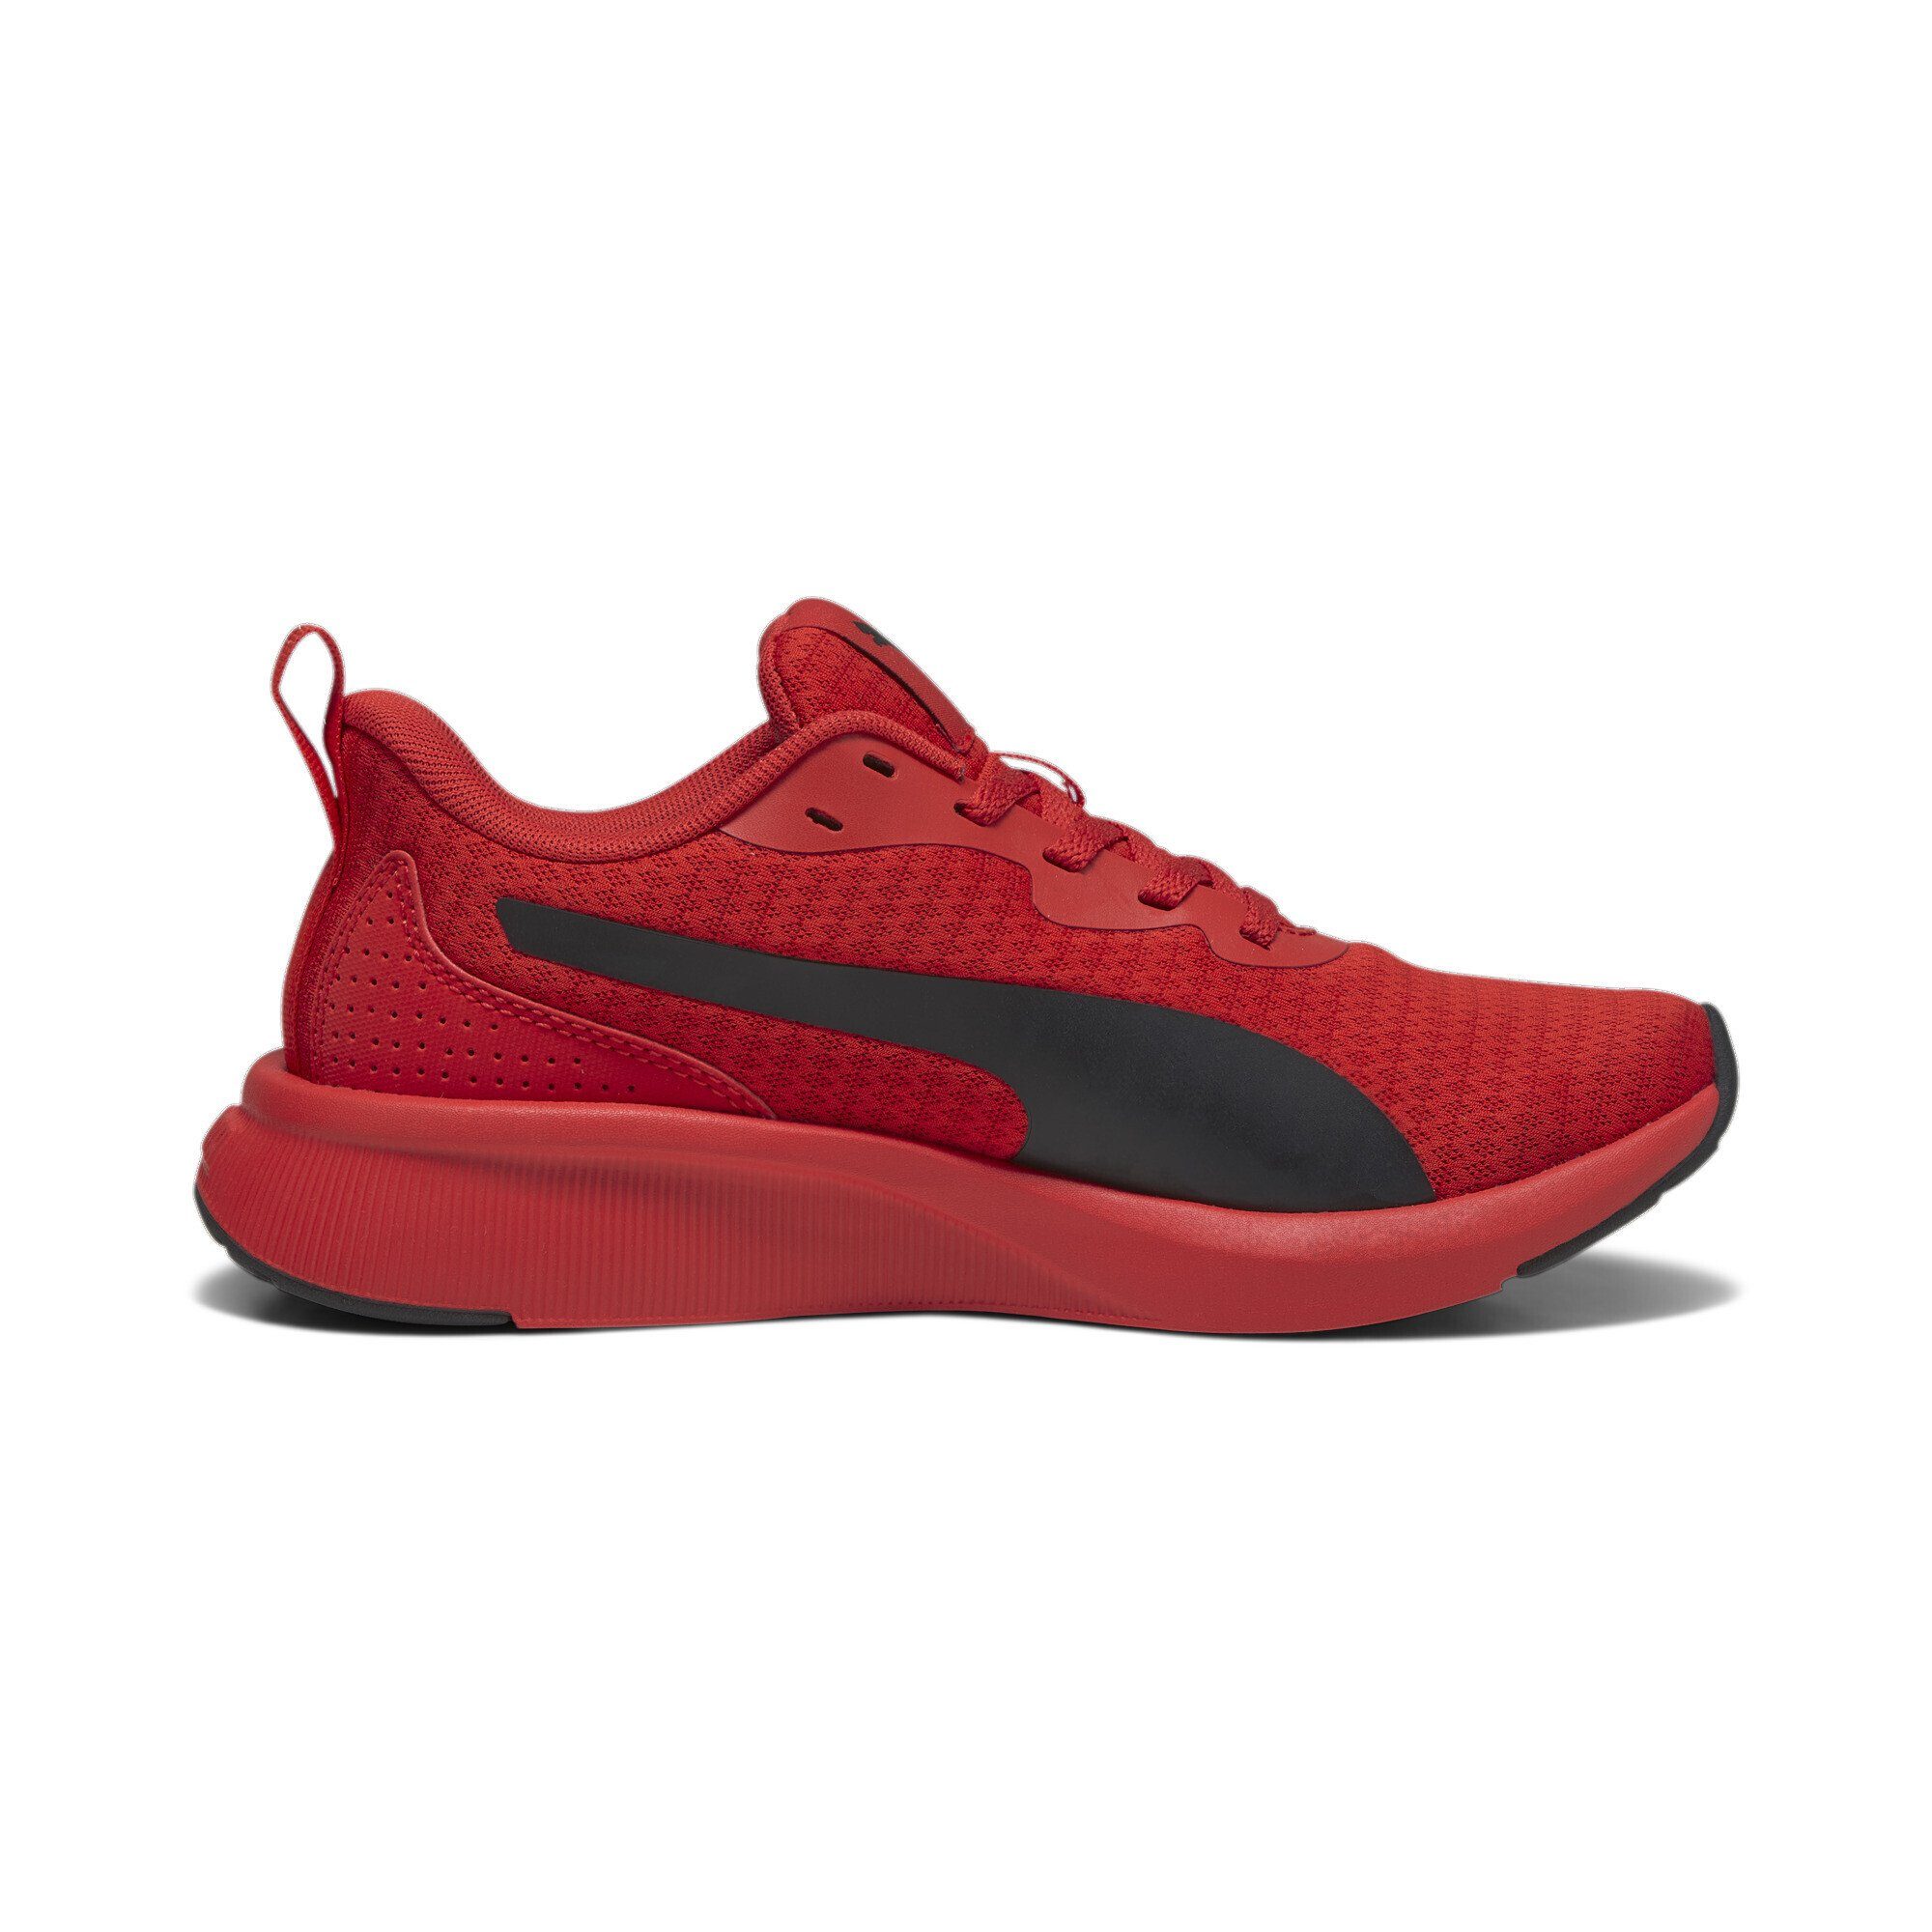 PUMA Flyer Lite All Black Trainingsschuh Time Jugendliche Red Sneakers For